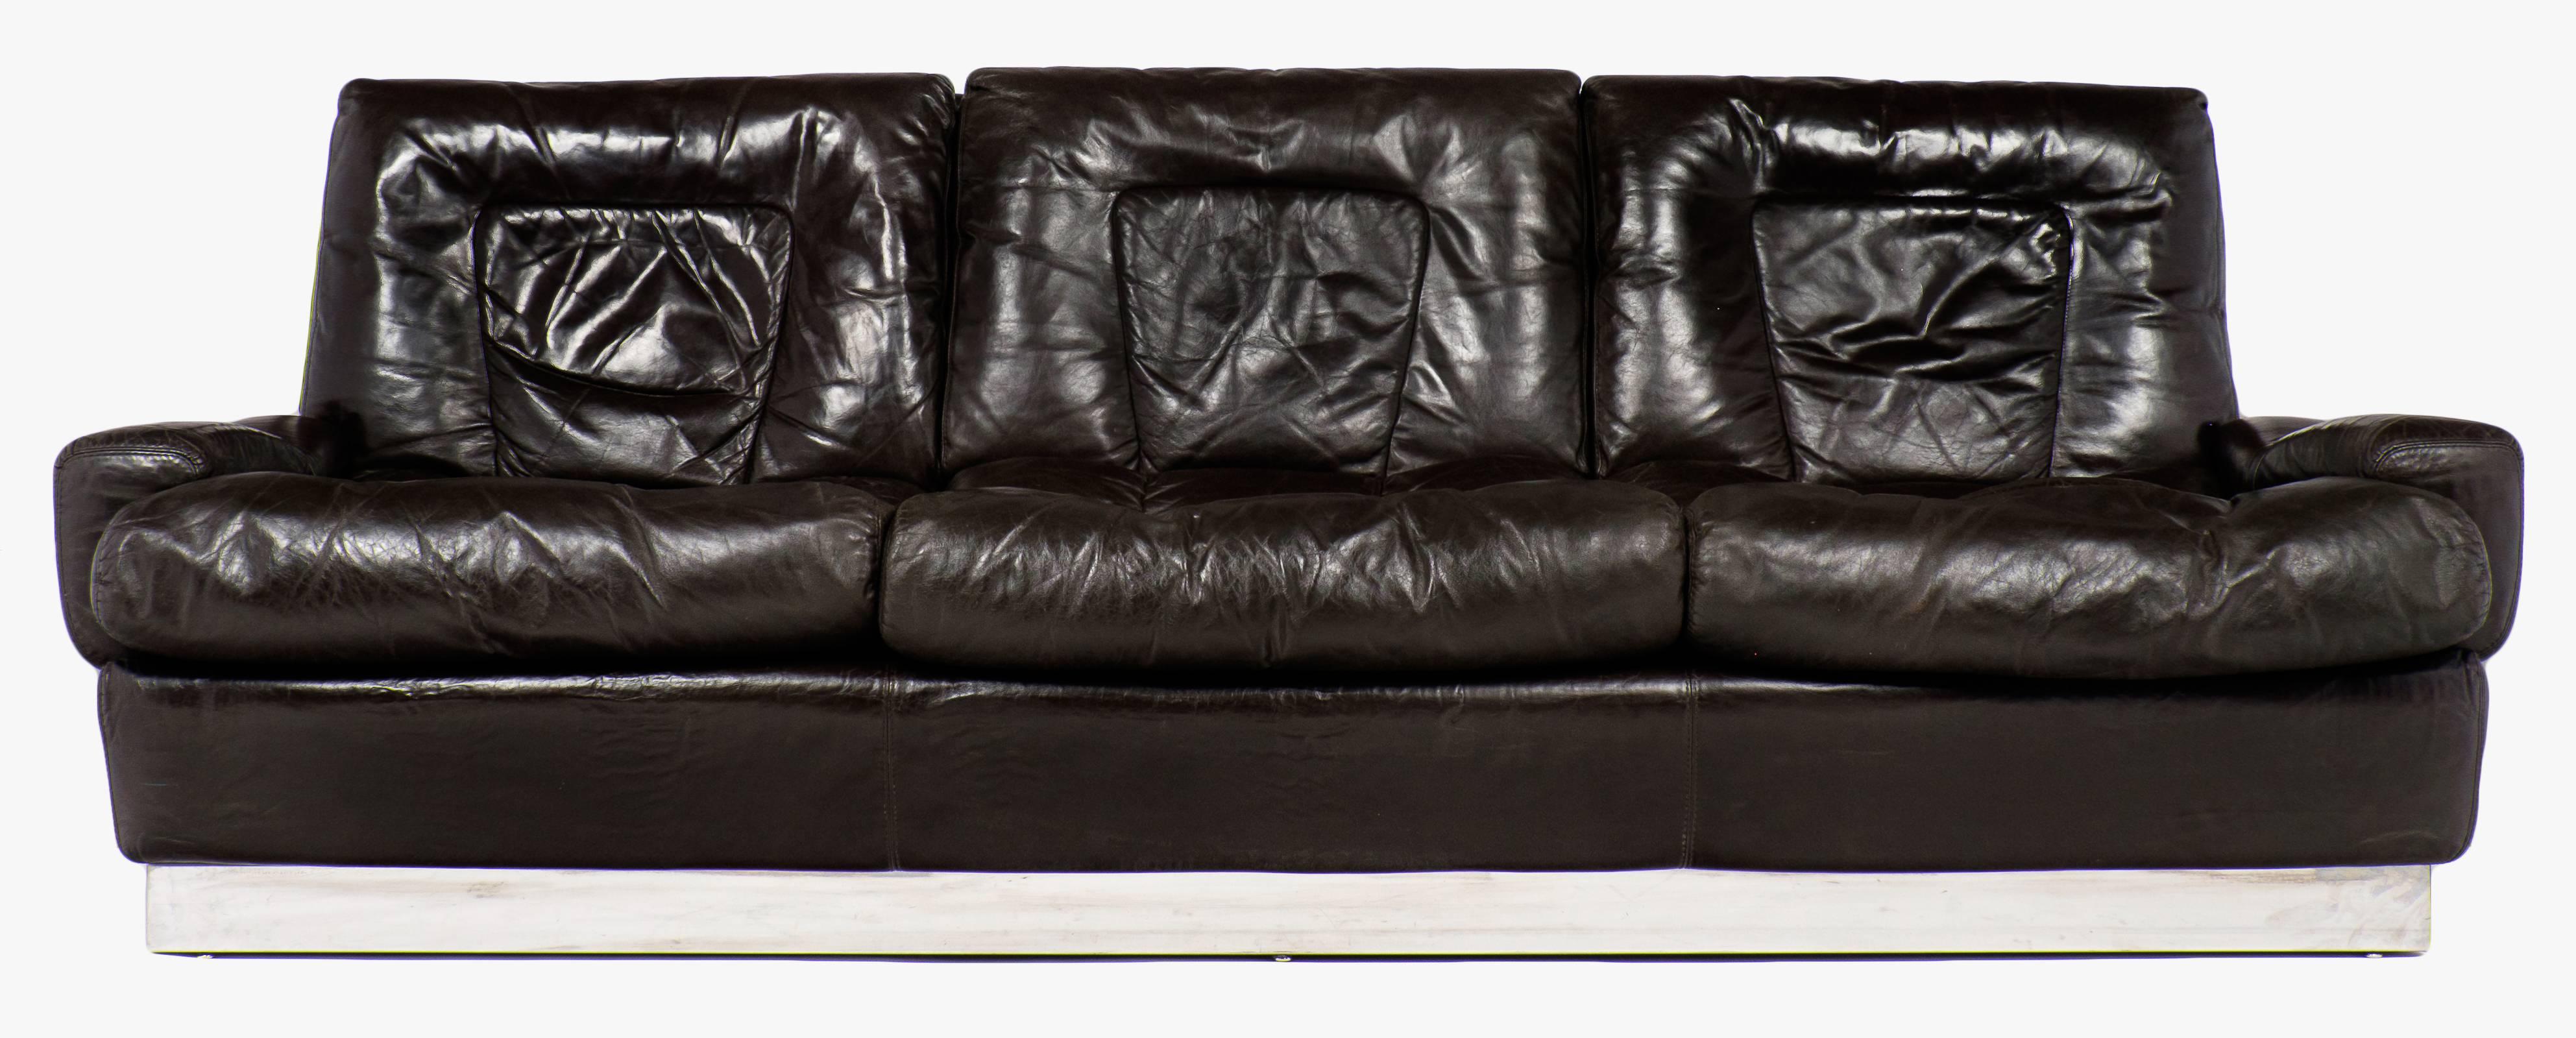 A modernist piece with ultimate comfort in mind, a vintage French leather sofa by Jacques Charpentier with plush dark walnut brown leather cushions and a chrome silver metal base. Measures: The seat height is 15.75.